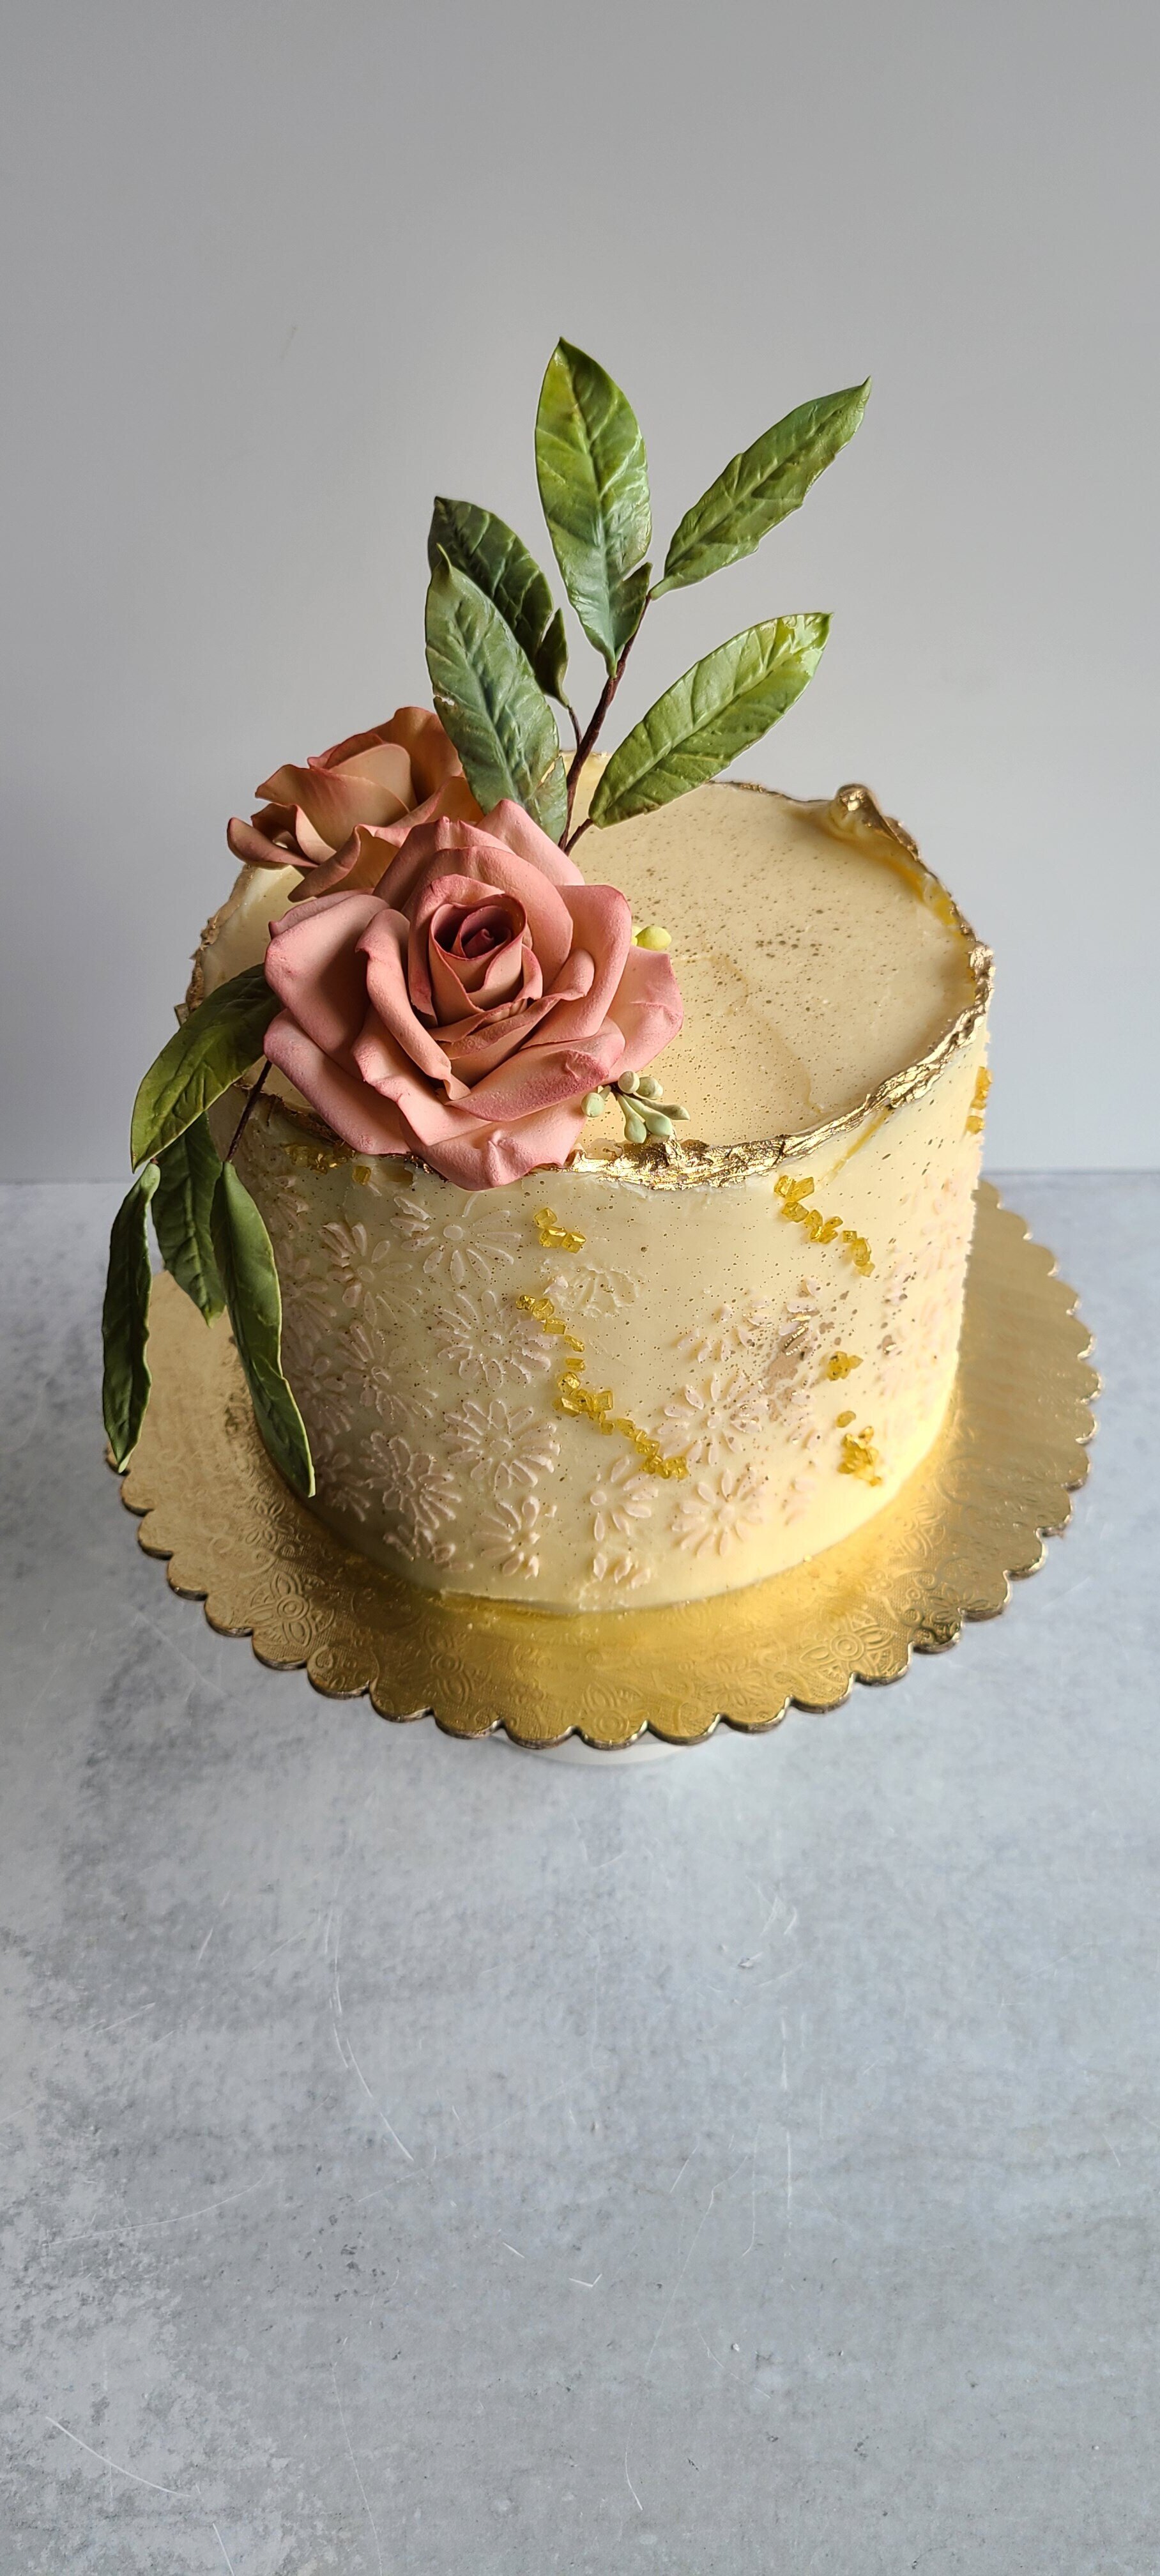 Lala Custom Cake - Mini 2 tier birthday cake! 💛💛 Edible gold leaf and a  mix of sugar and fresh flowers. Lemon blueberry cake and red velvet! We  usually do not do